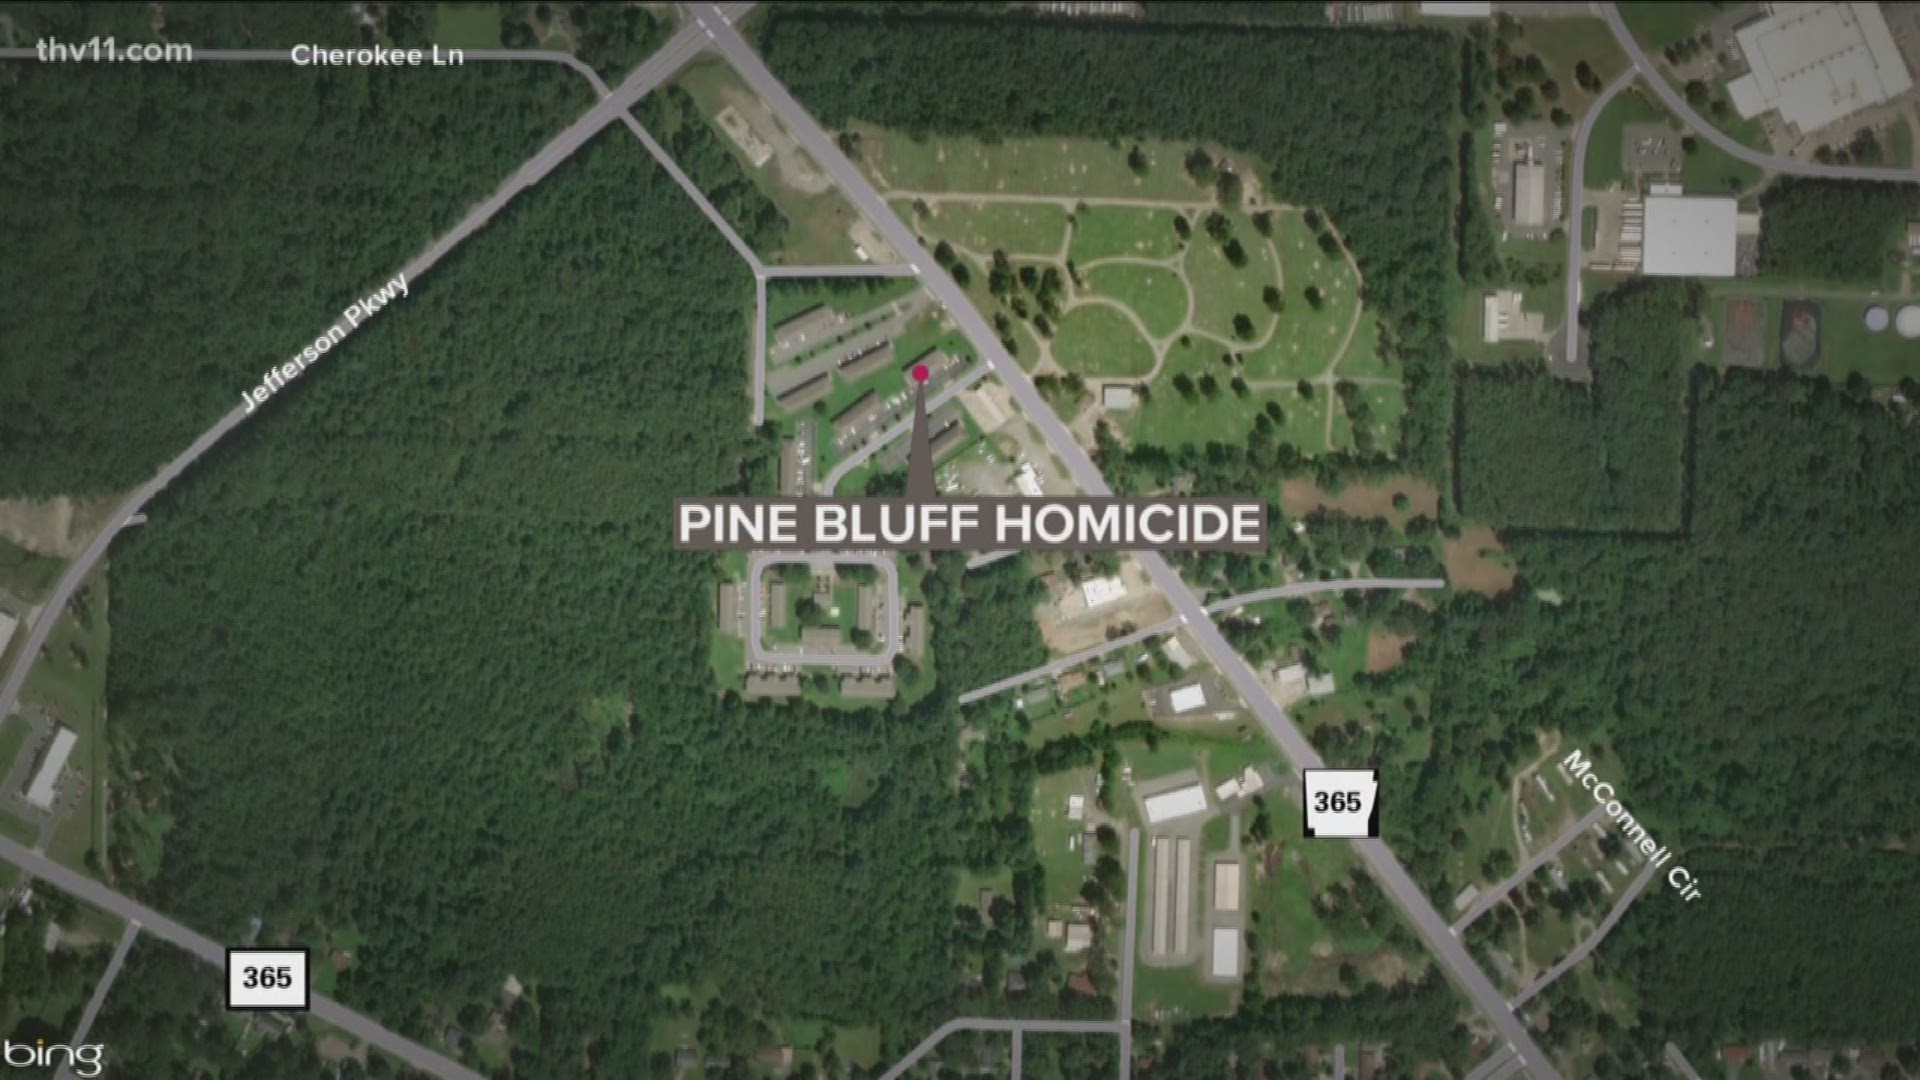 The Pine Bluff Police Department is investigating a homicide after responding to a shooting at an apartment complex.